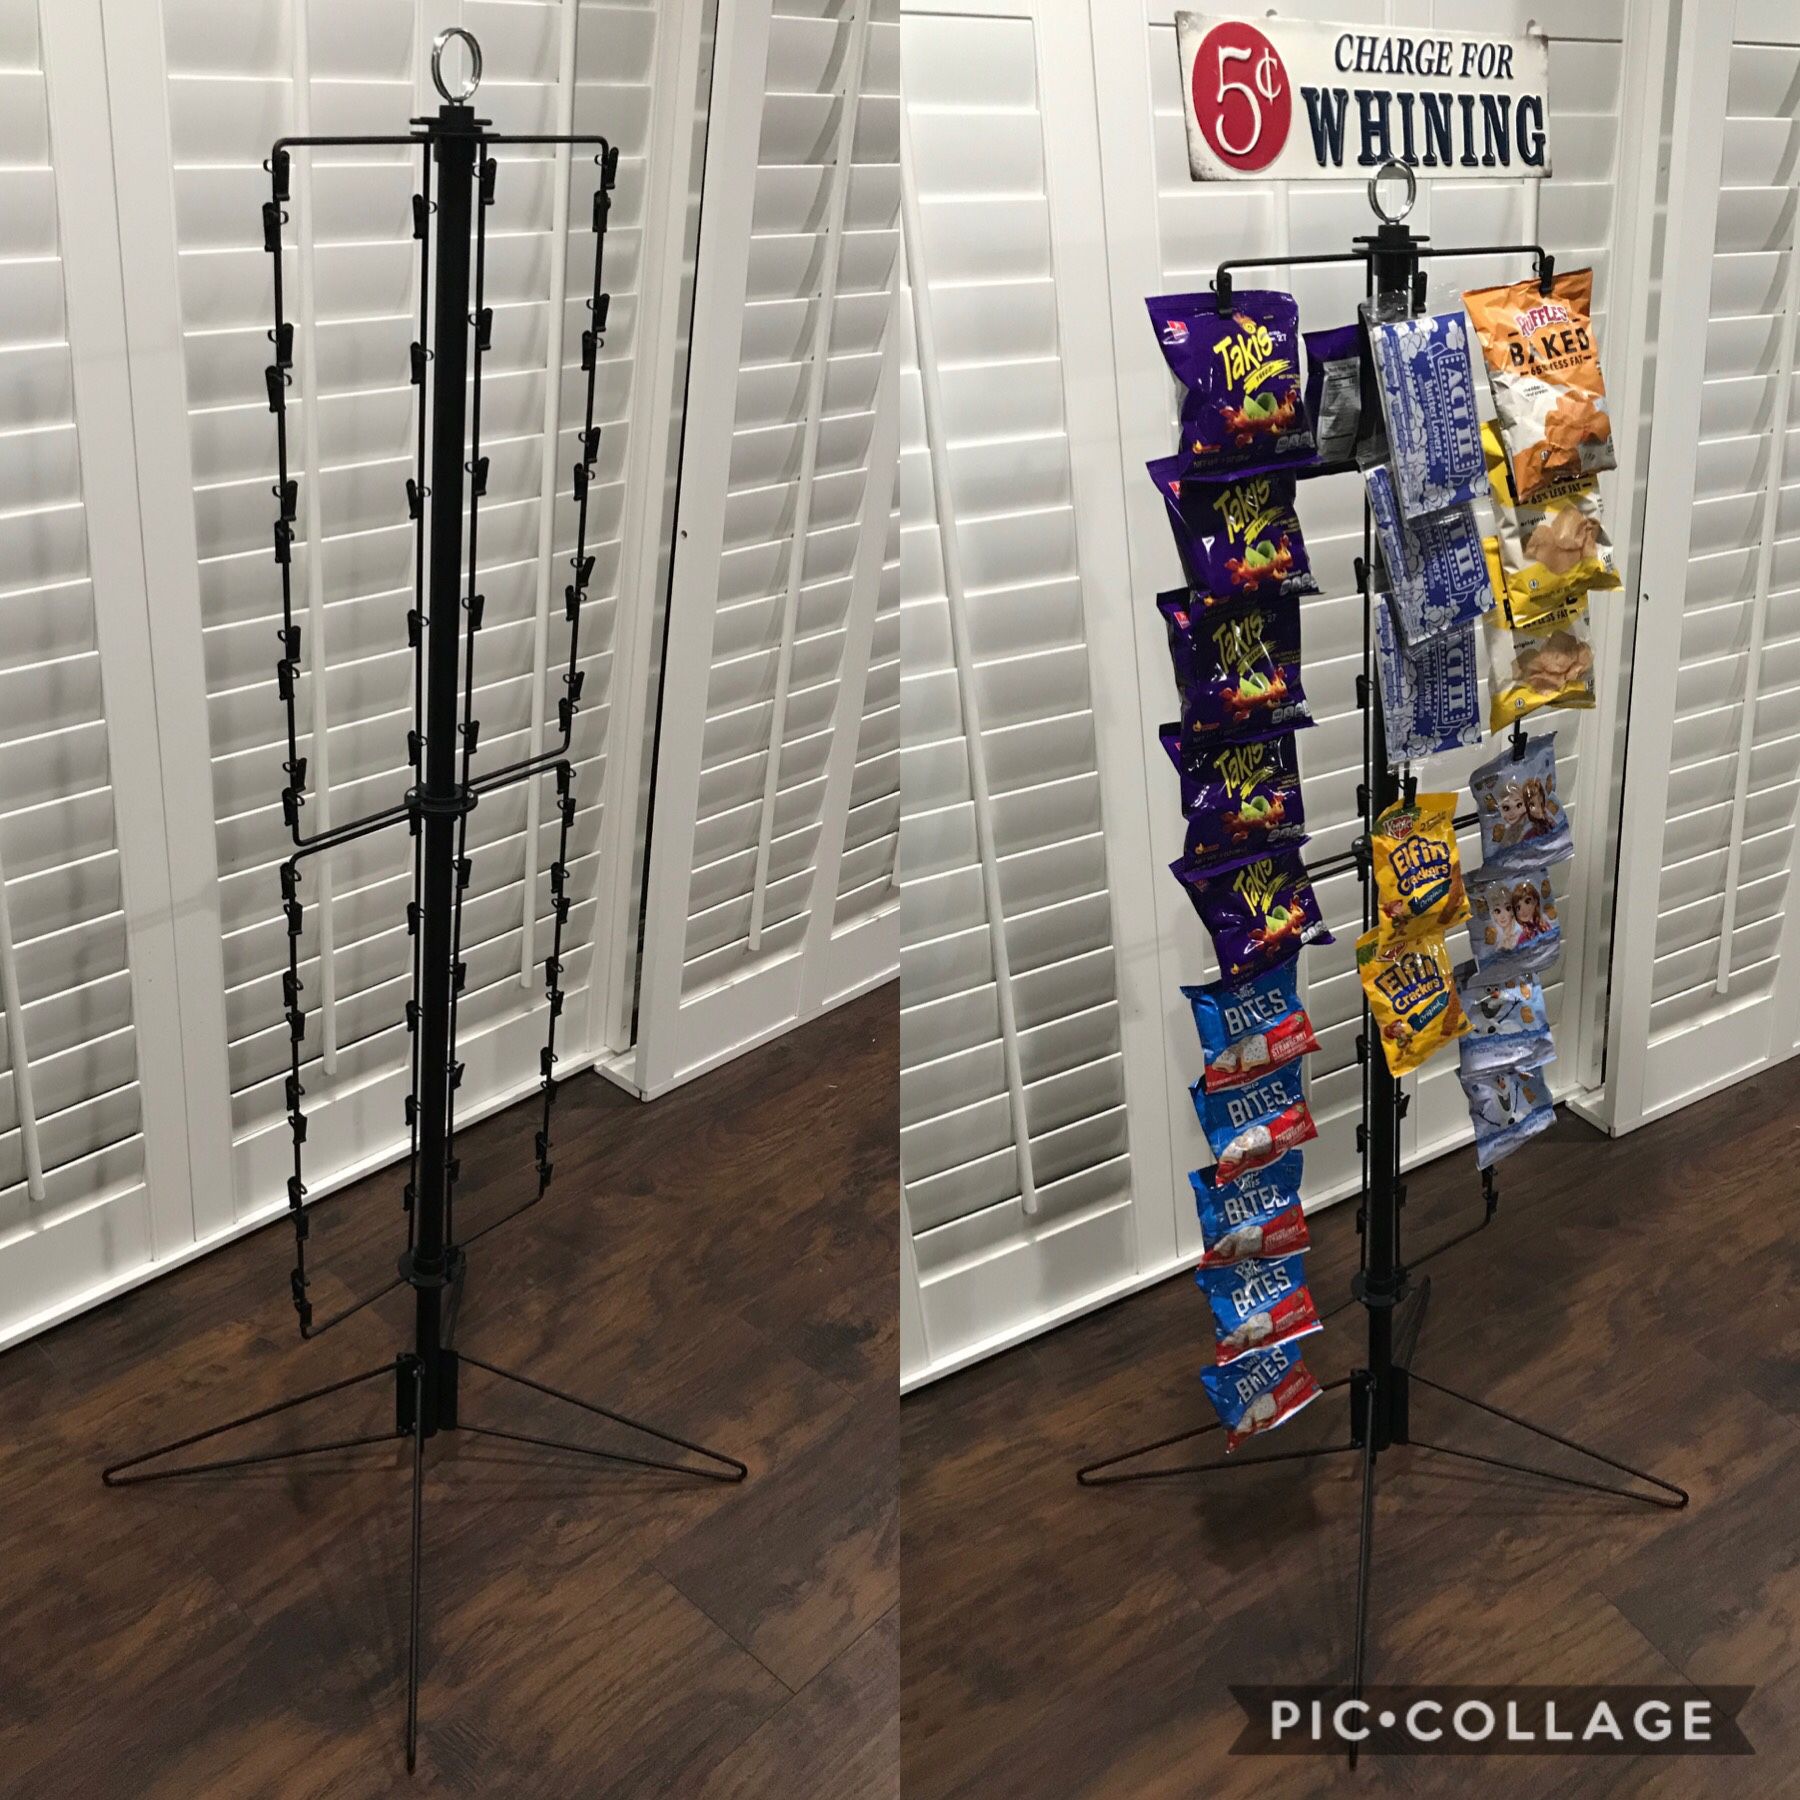 NEW Metal Floor-Standing Chip/Snack/Merchandise Rotating 60 Clip Rack (55”Tall)•$20ea or 2 x $30